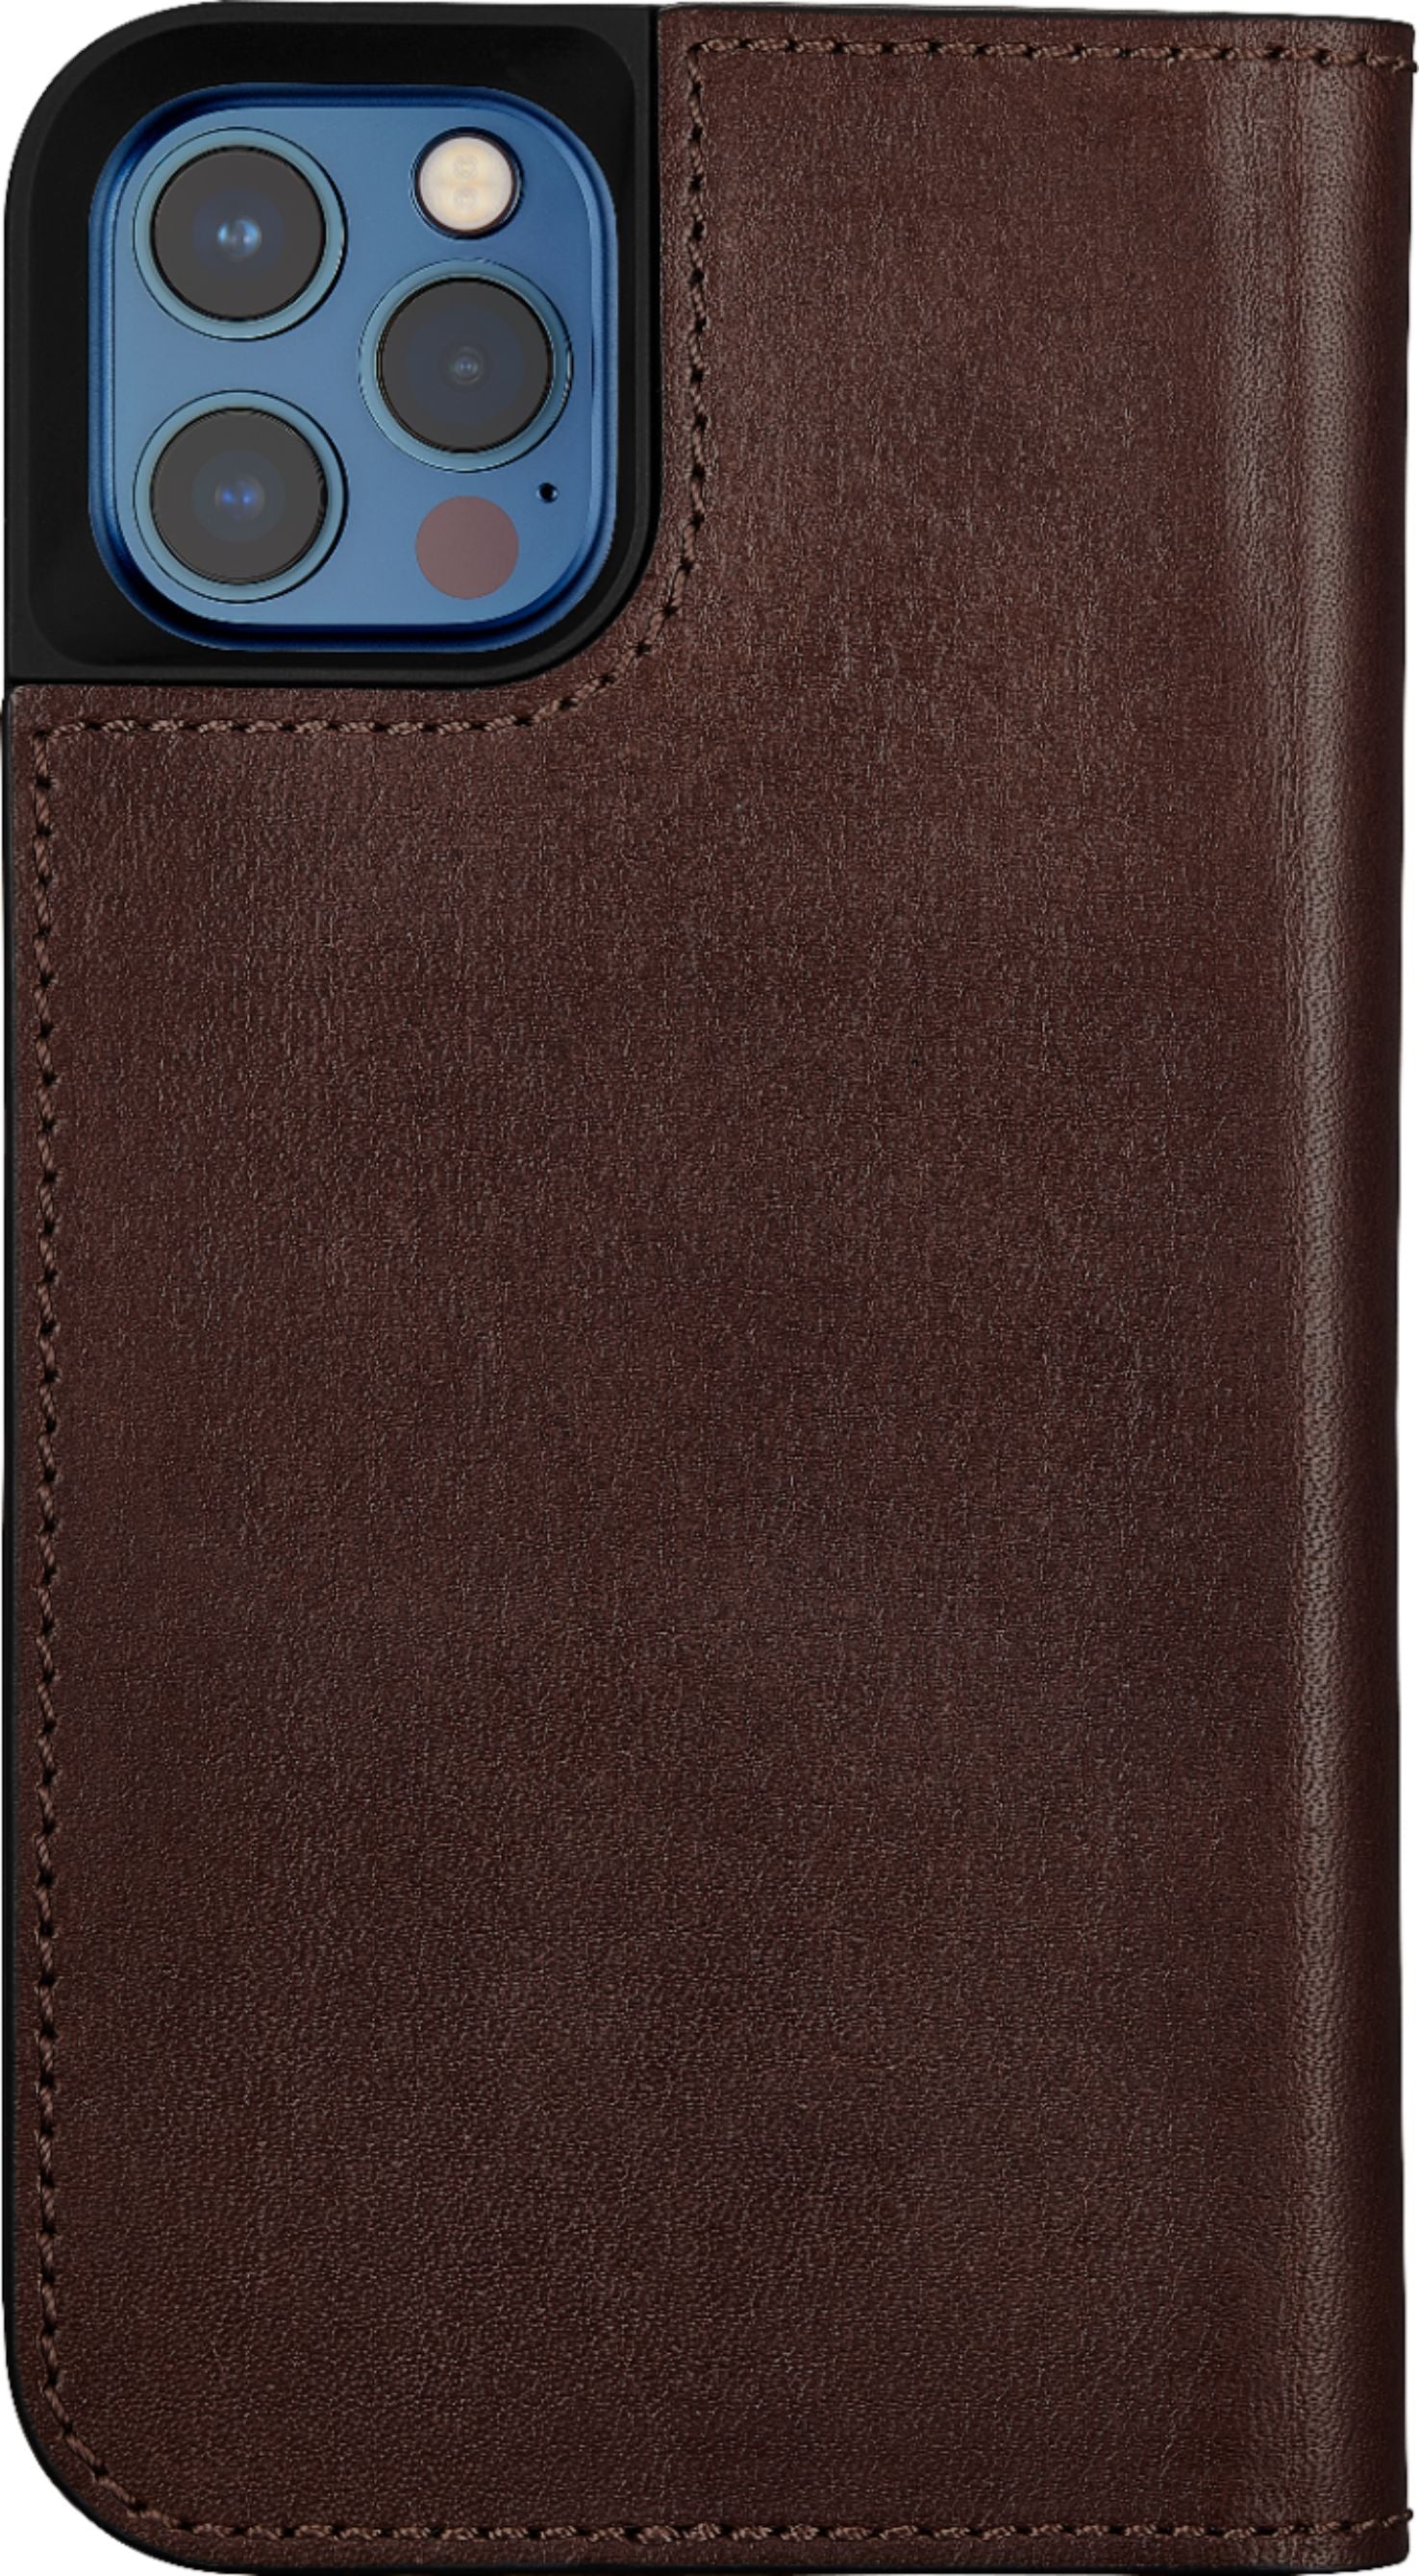 Platinum™ - PT-MAXIIMHLBR Genuine Leather Wallet Folio for iPhone® 12 and iPhone® 12 Pro - Brown